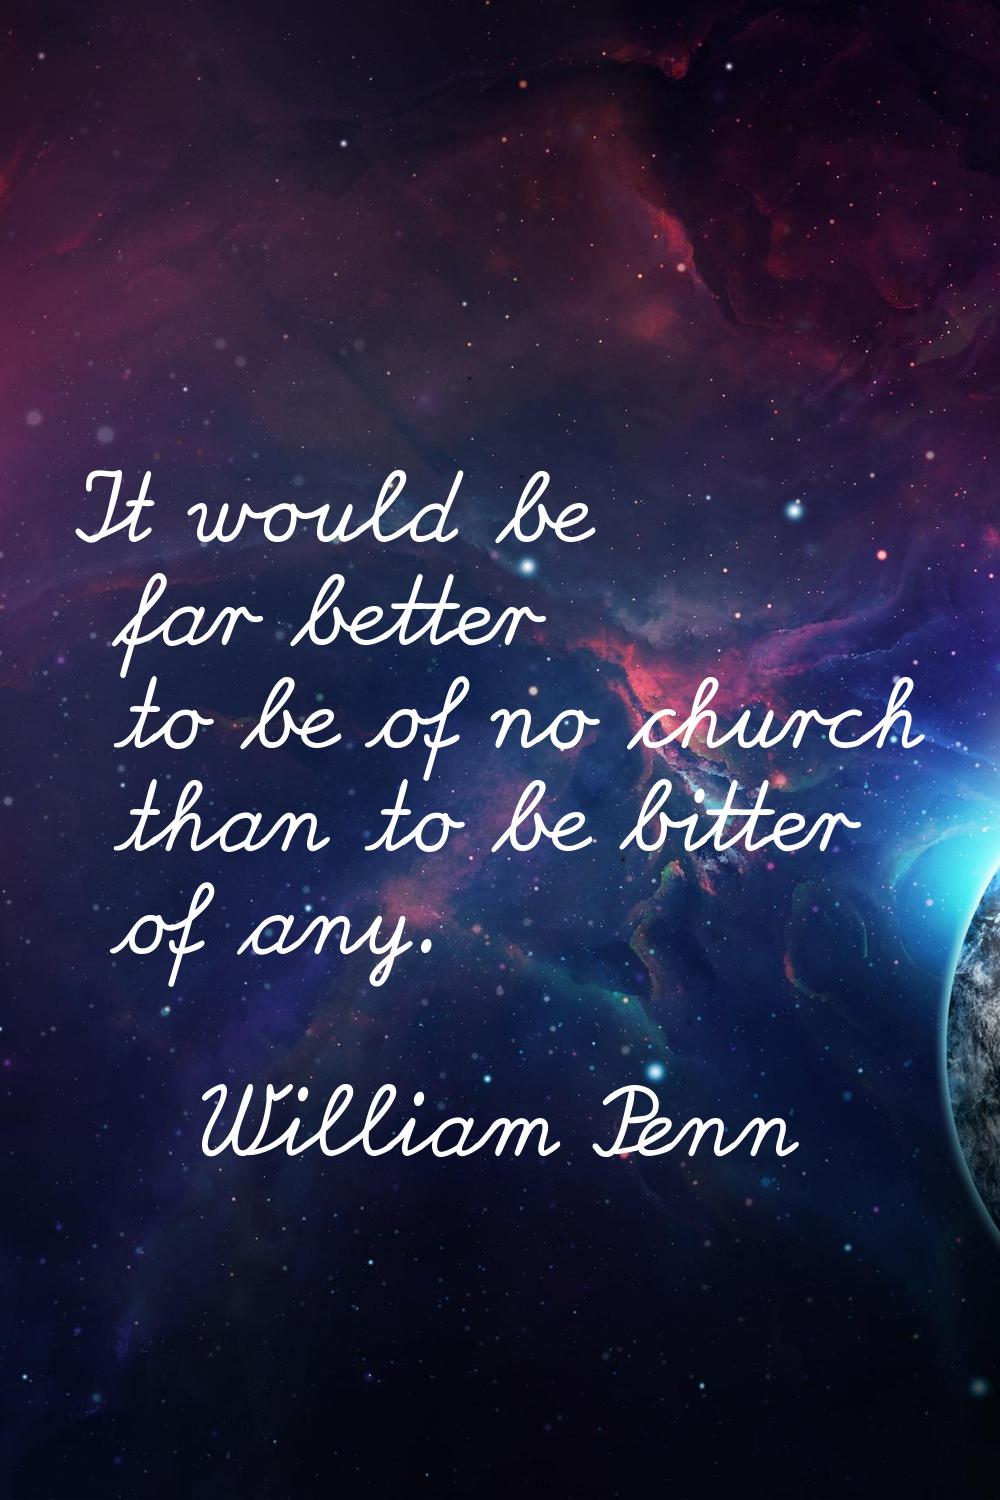 It would be far better to be of no church than to be bitter of any.